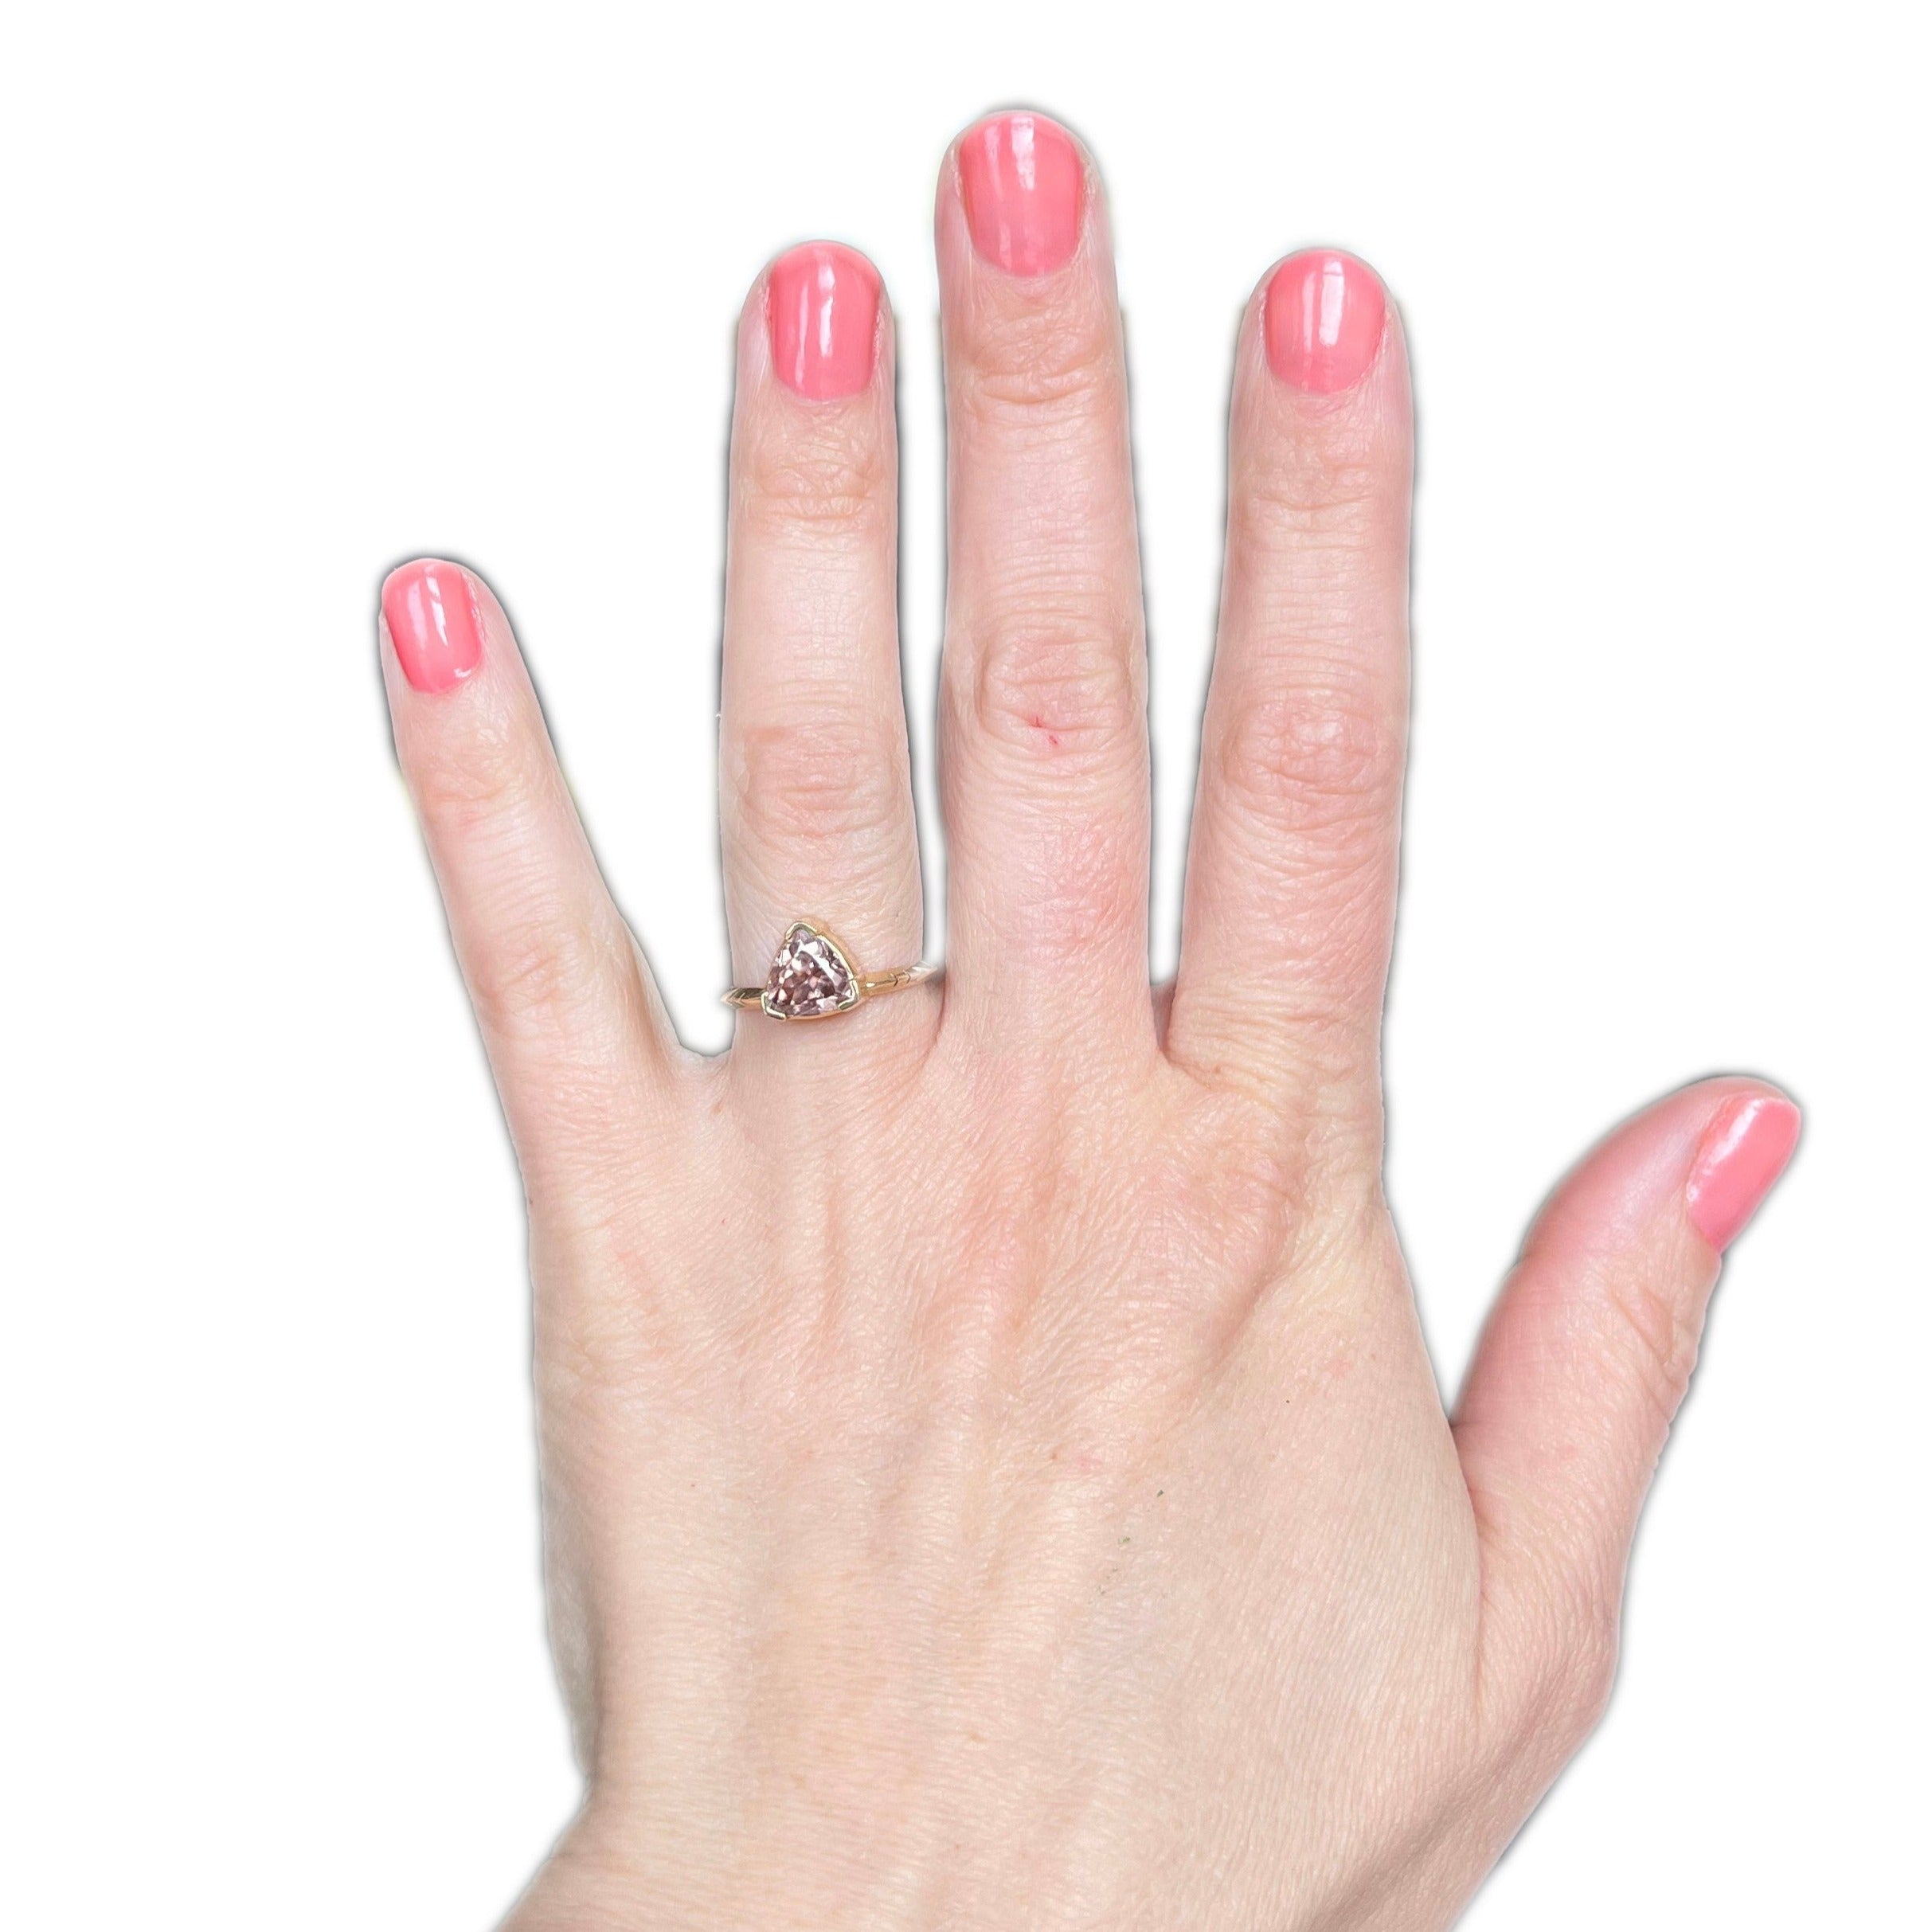 Woman's finger adorned with the Umbra Trillion Ring, showcasing a rose-colored Australian zircon.